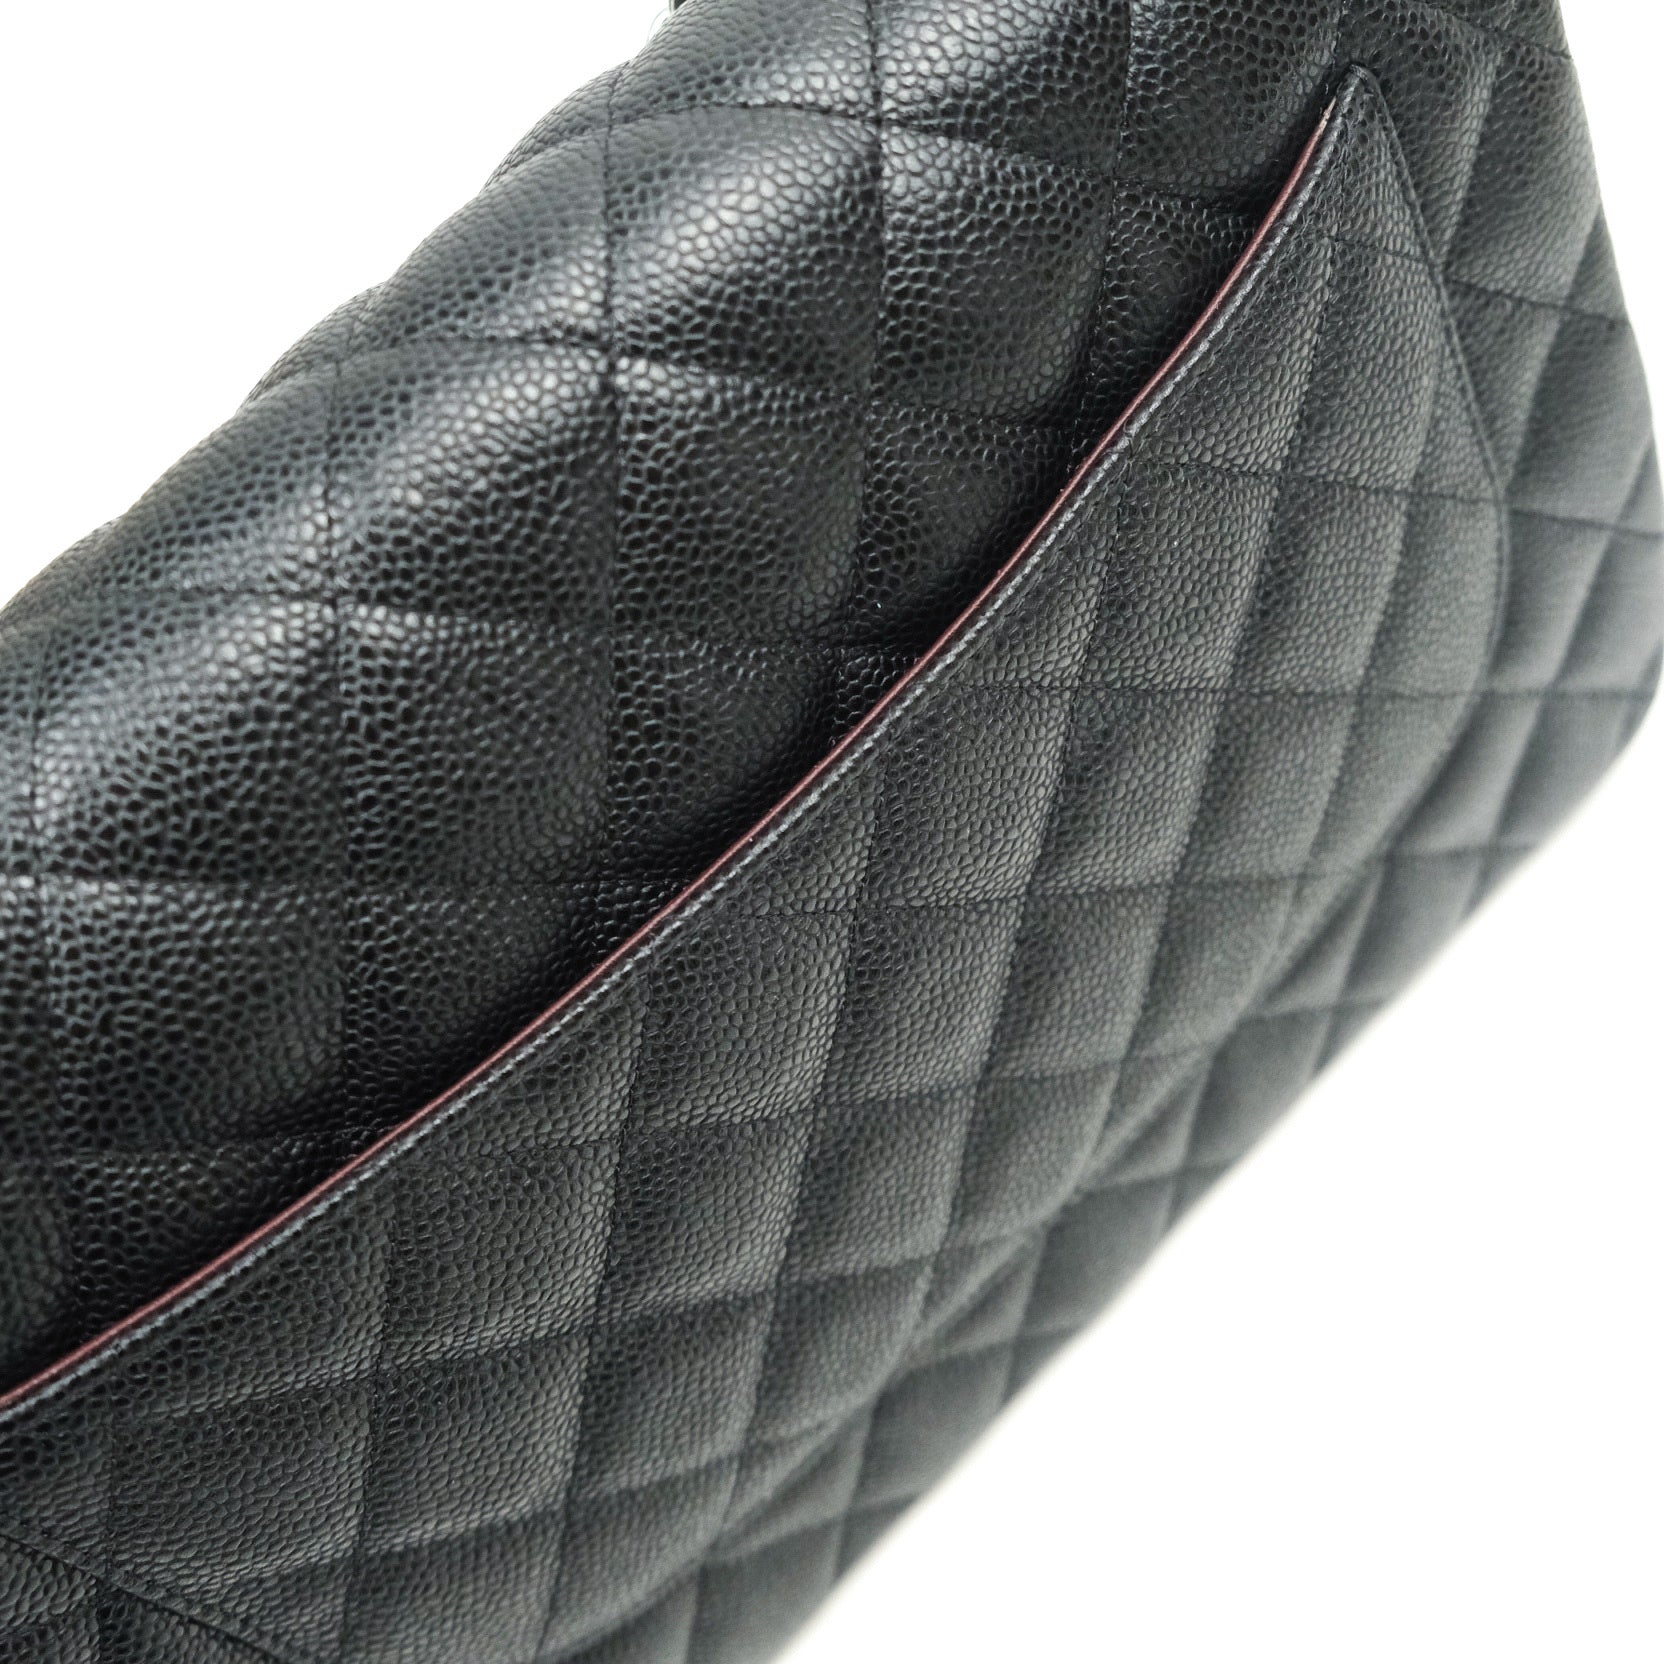 Chanel Black Quilted Caviar Jumbo Classic Double Flap Silver Hardware, 2013 (Very Good), Womens Handbag